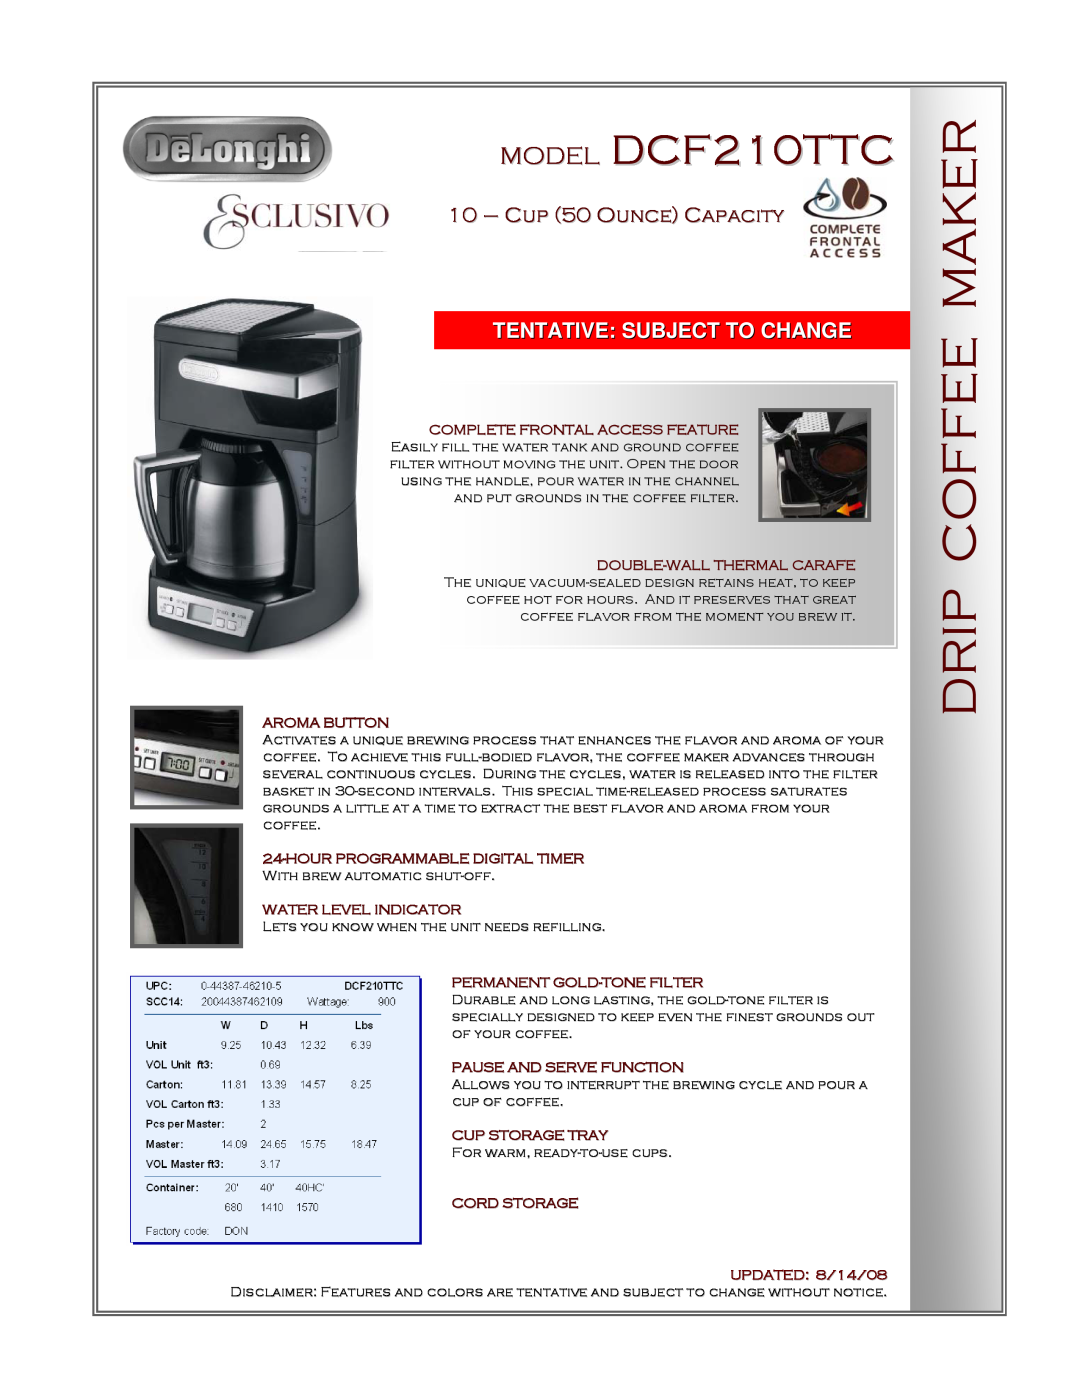 DeLonghi manual Drip Coffee Maker, MODEL DCF210TTC, Cup 50 Ounce Capacity, Tentative Subject To Change, Aroma Button 